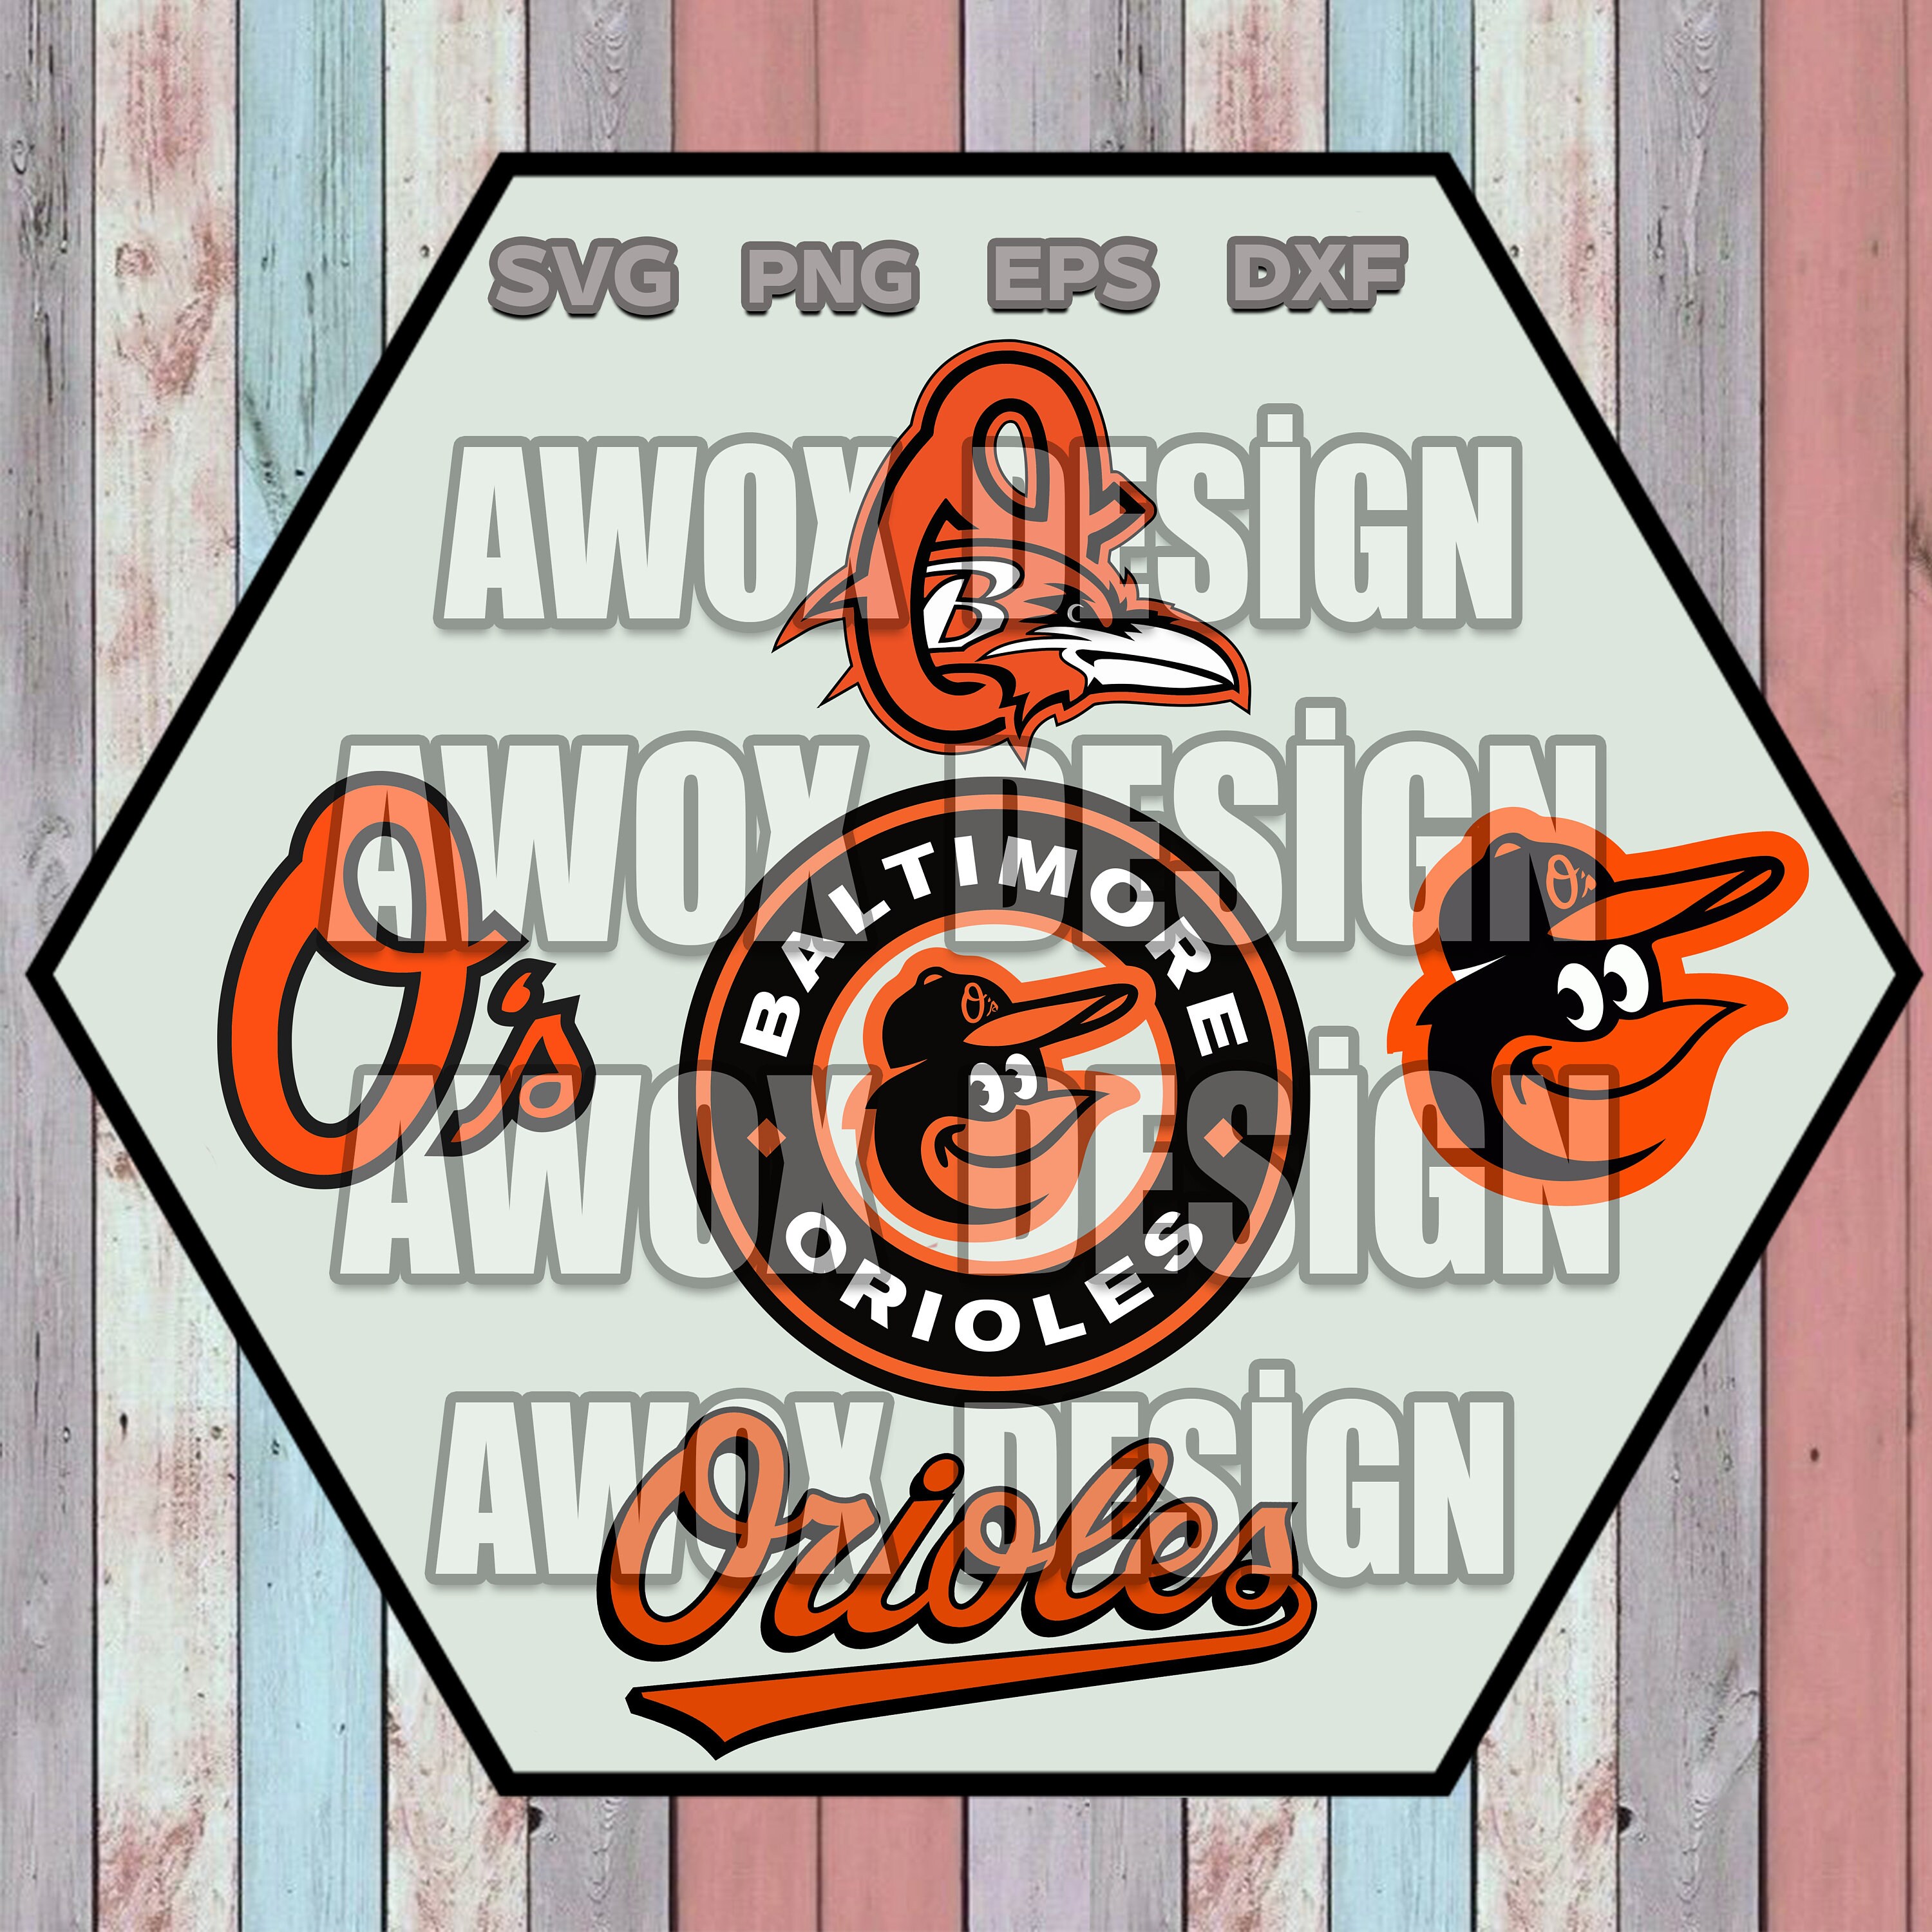 Baltimore Orioles SVG File – Vector Design in, Svg, Eps, Dxf, and Jpeg  Format for Cricut and Silhouette, Digital download – SVG Shop